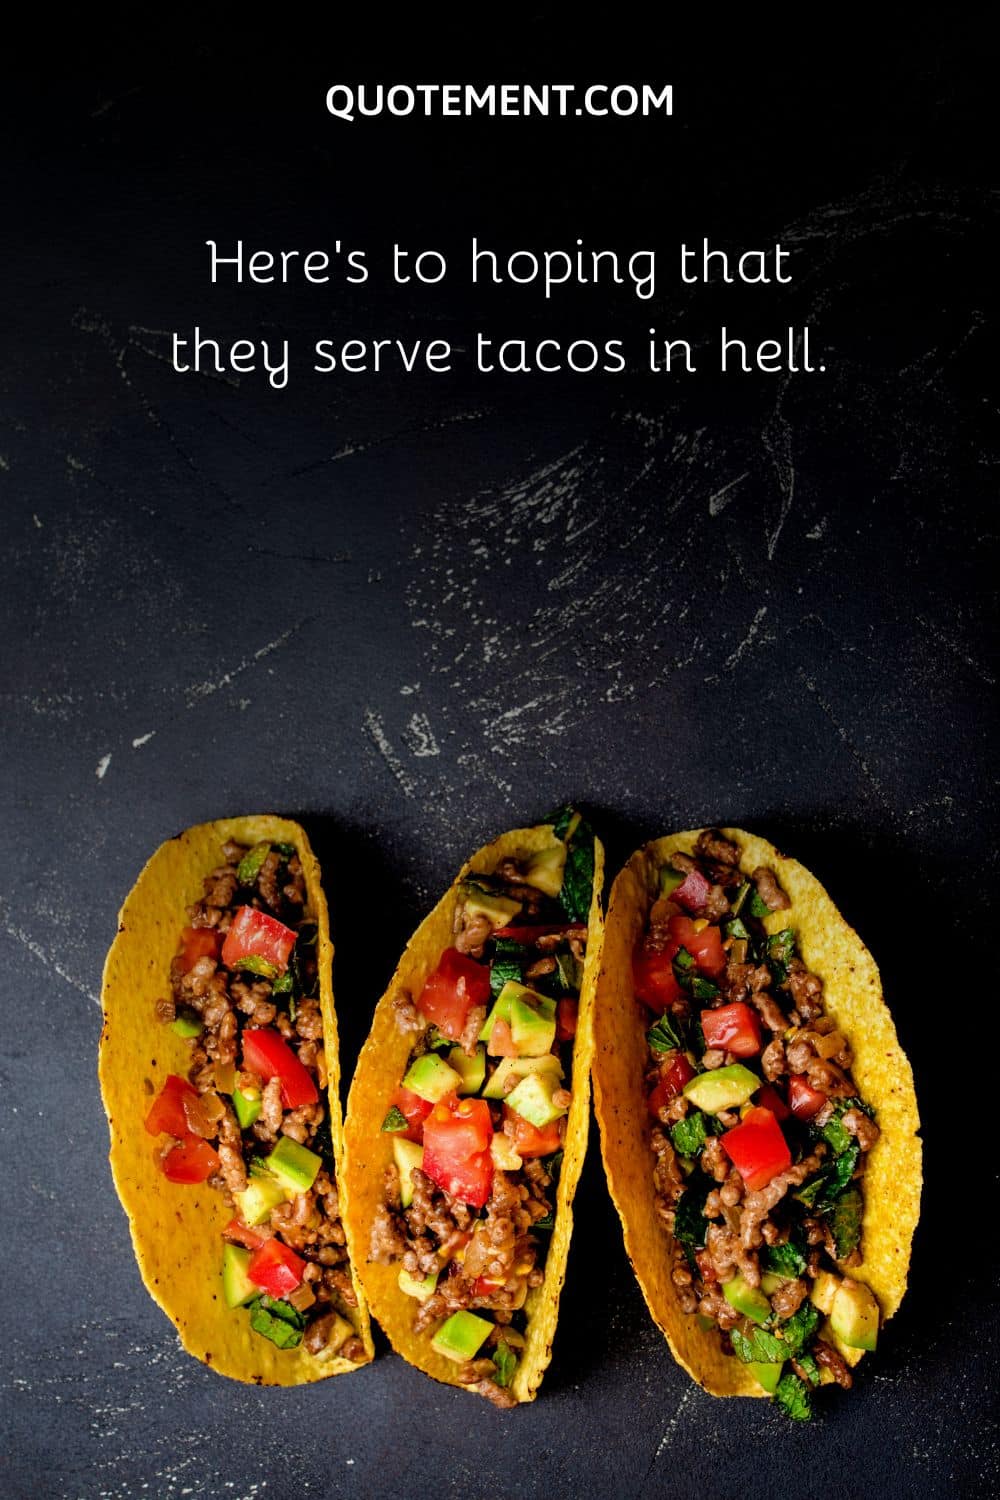 Here’s to hoping that they serve tacos in hell